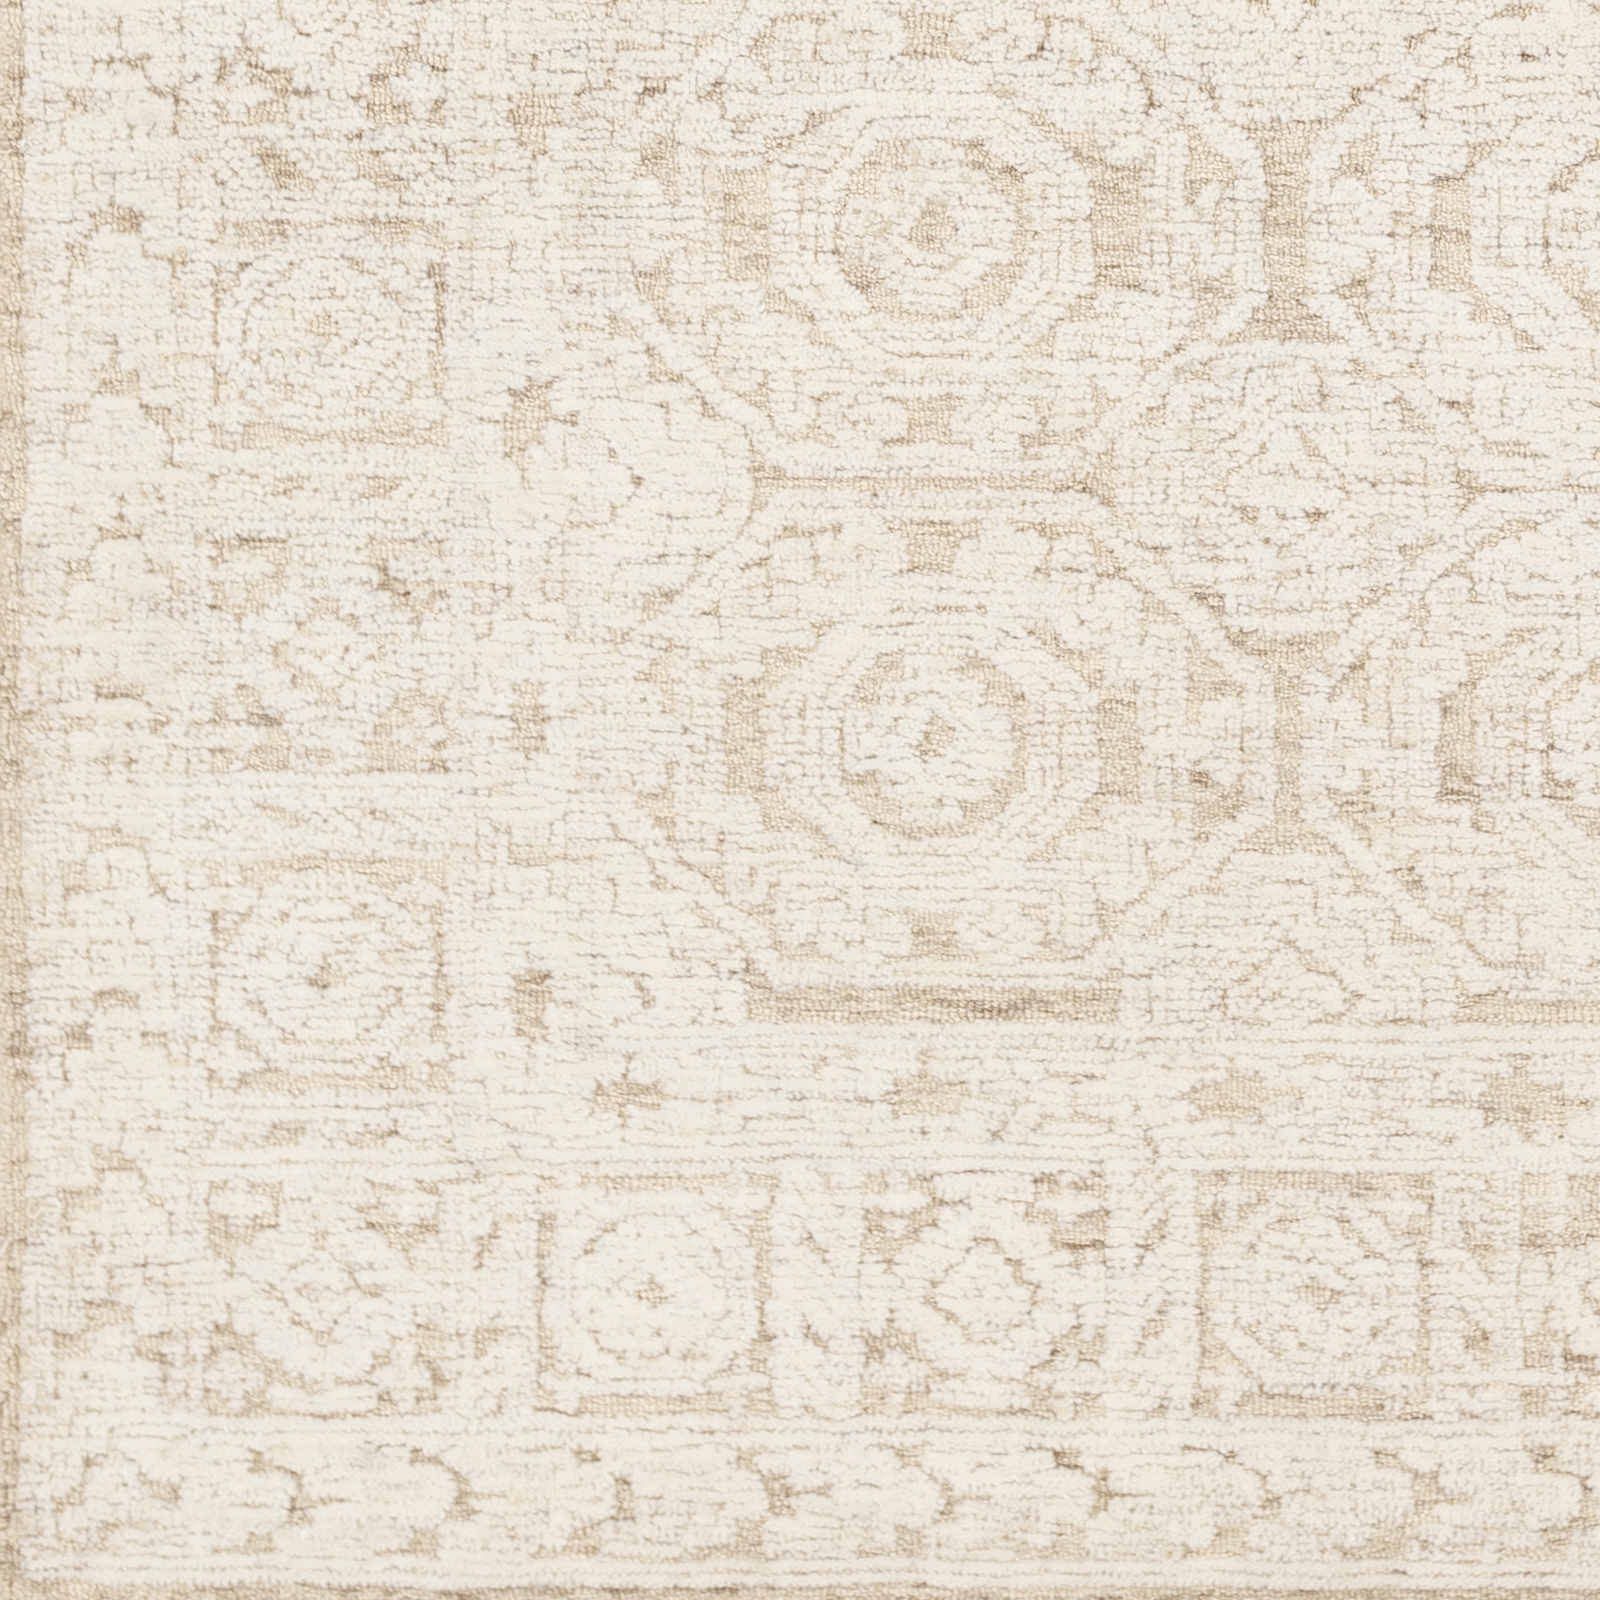 Louvre Rug, 10' x 14' - Image 2